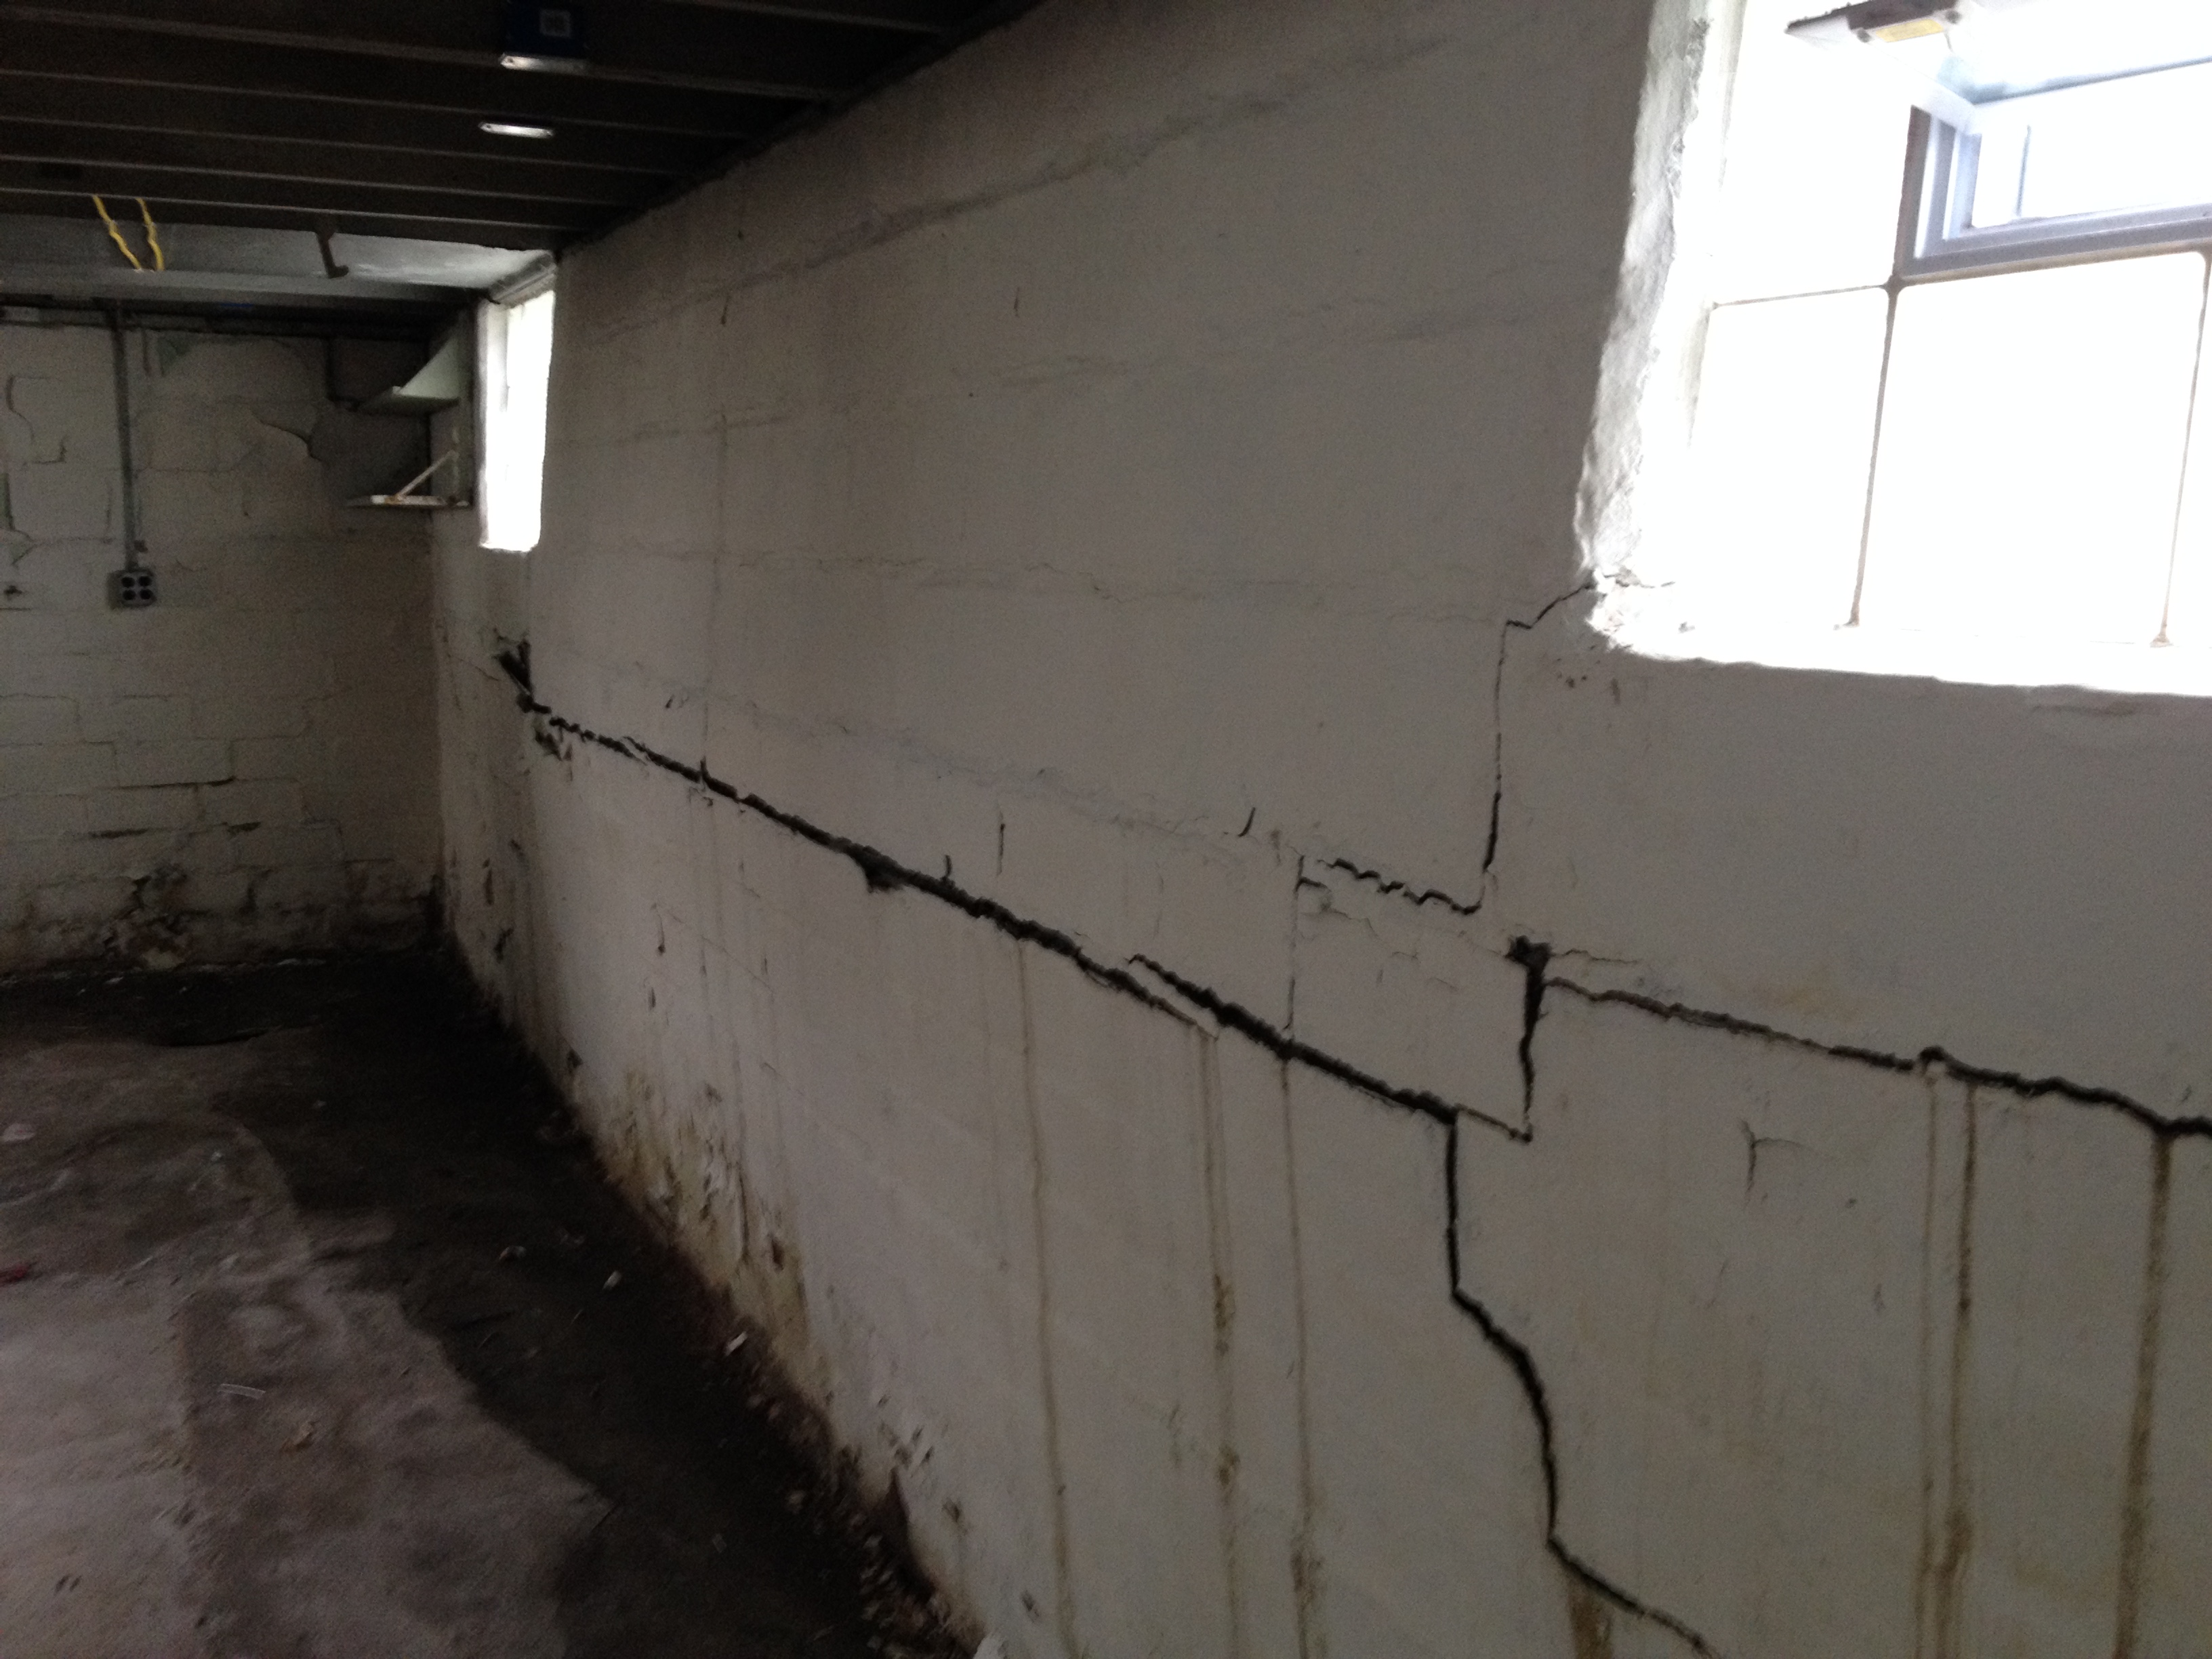 Basement Wall Repair Methods Are Not One Size Fits All